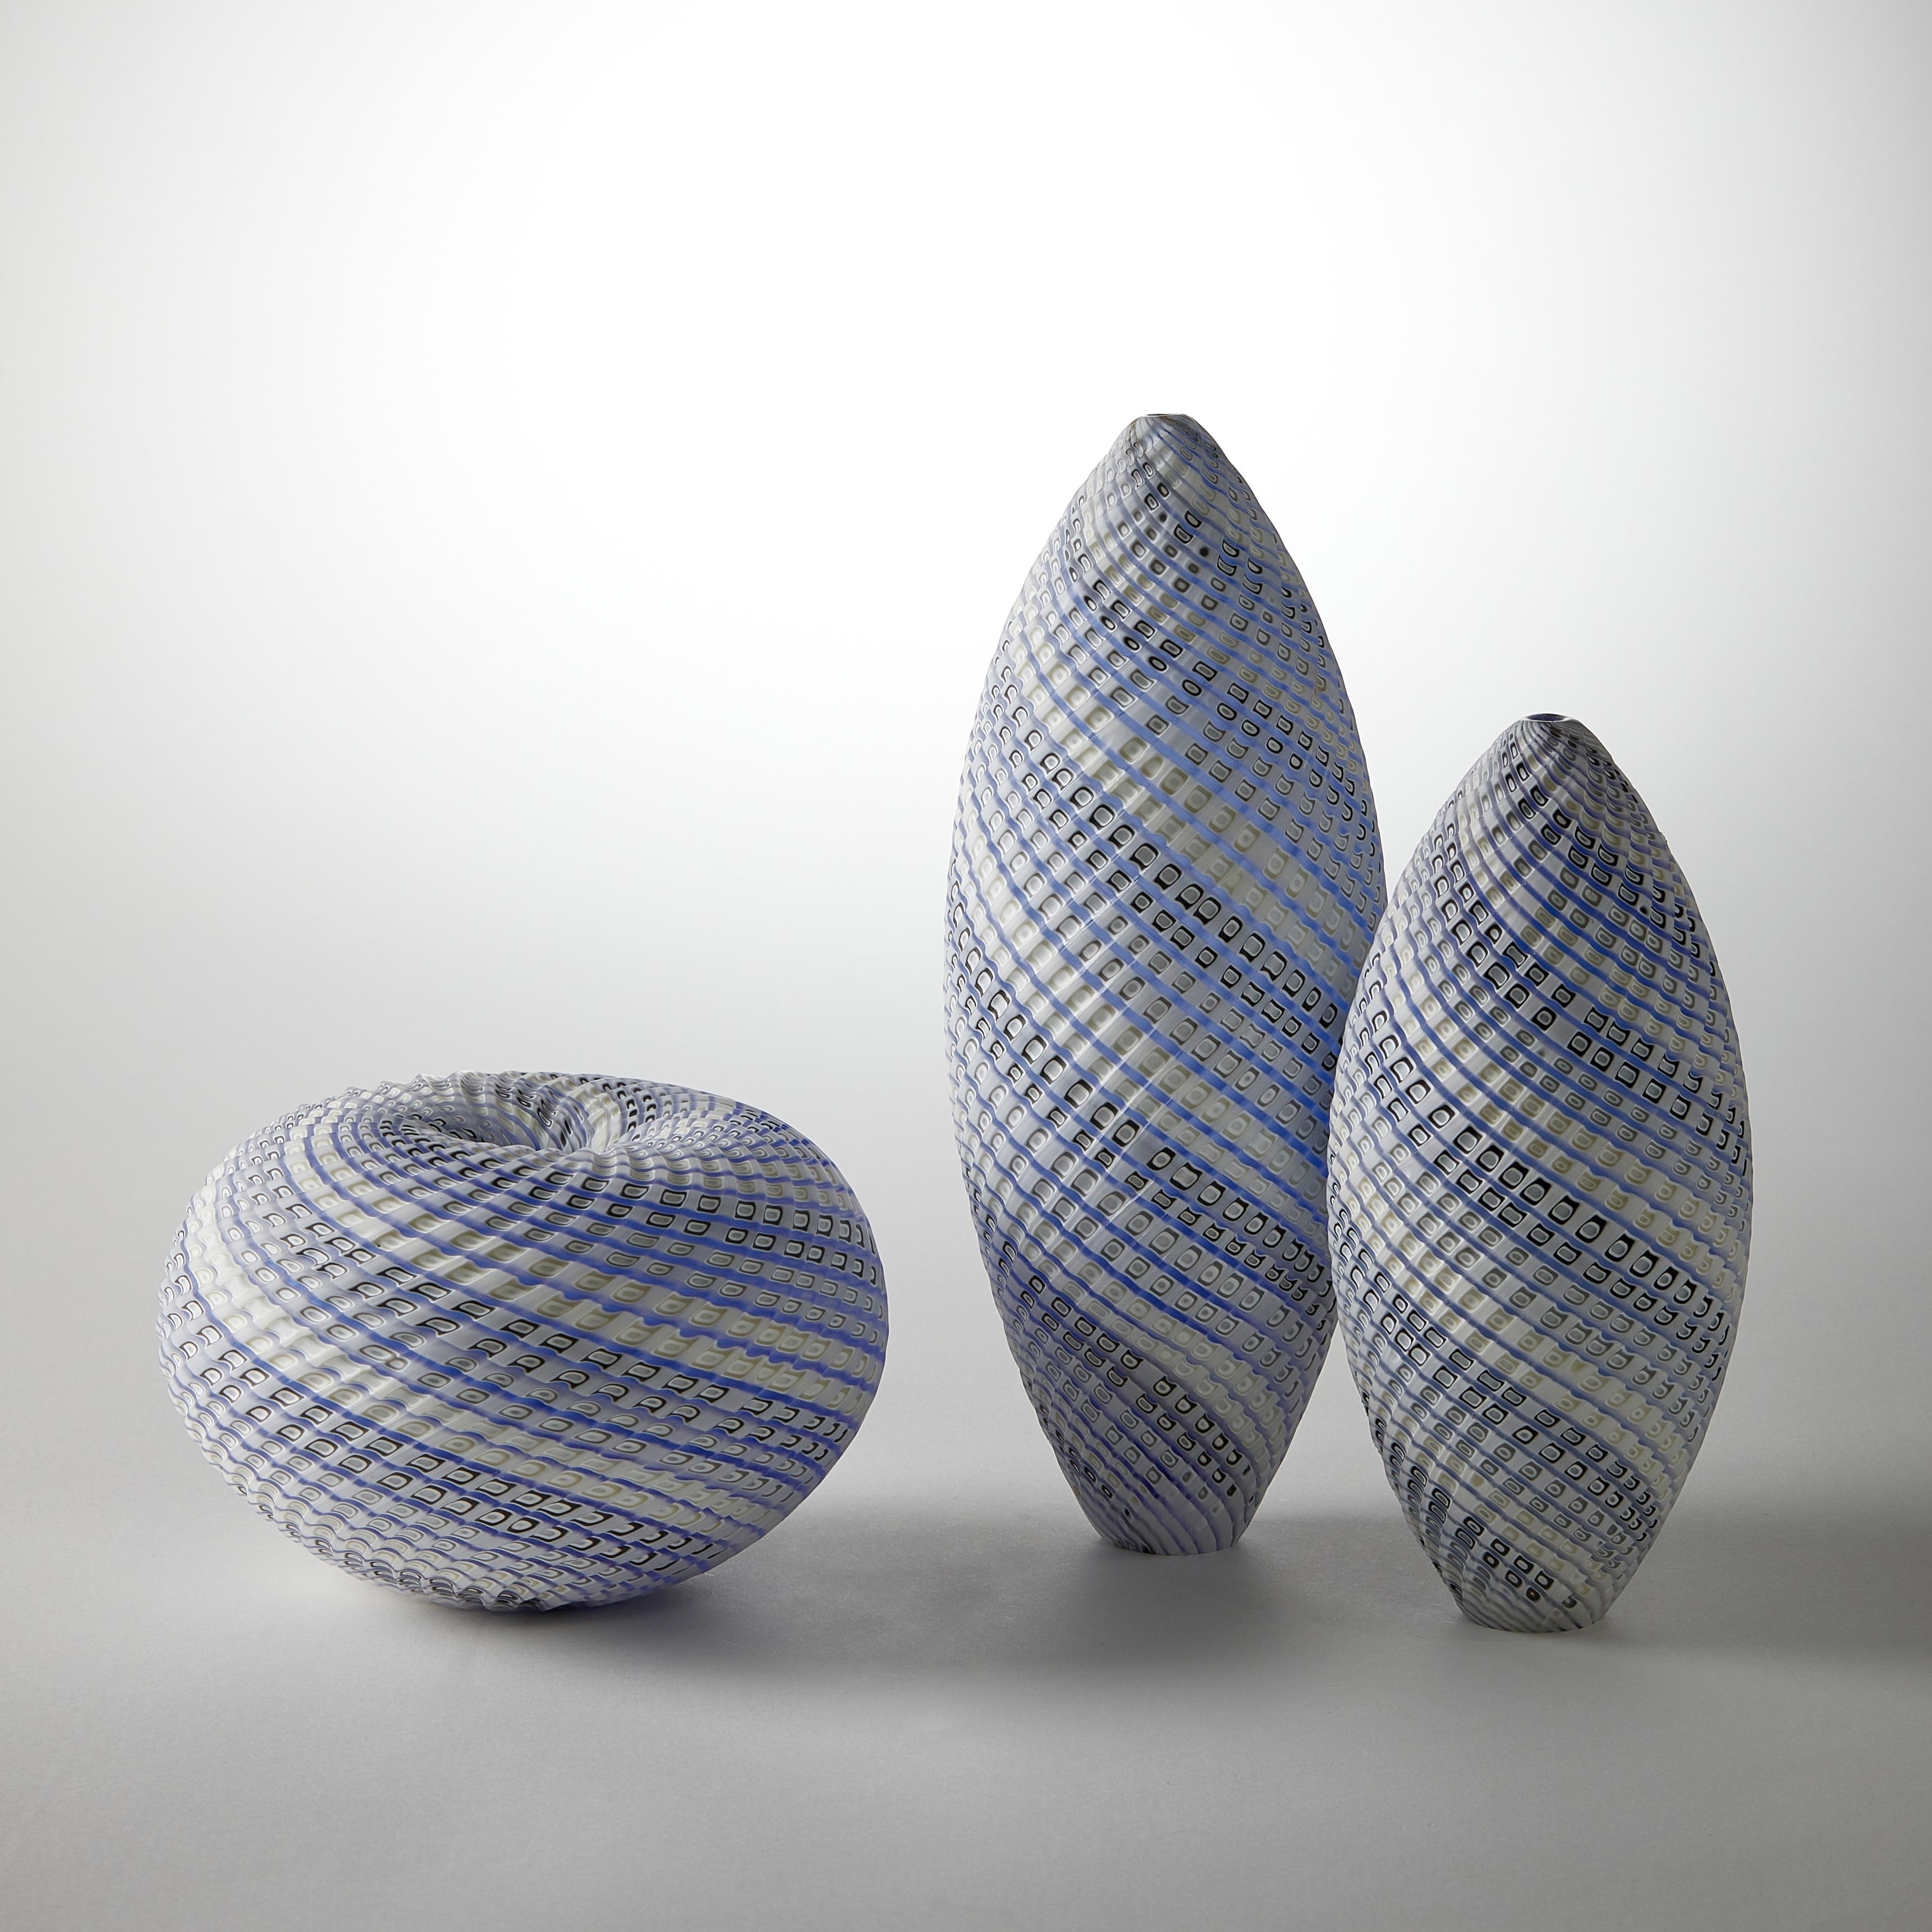 British Woven Three Tone Blue Trio, a Blue and White Glass Installation by Layne Rowe